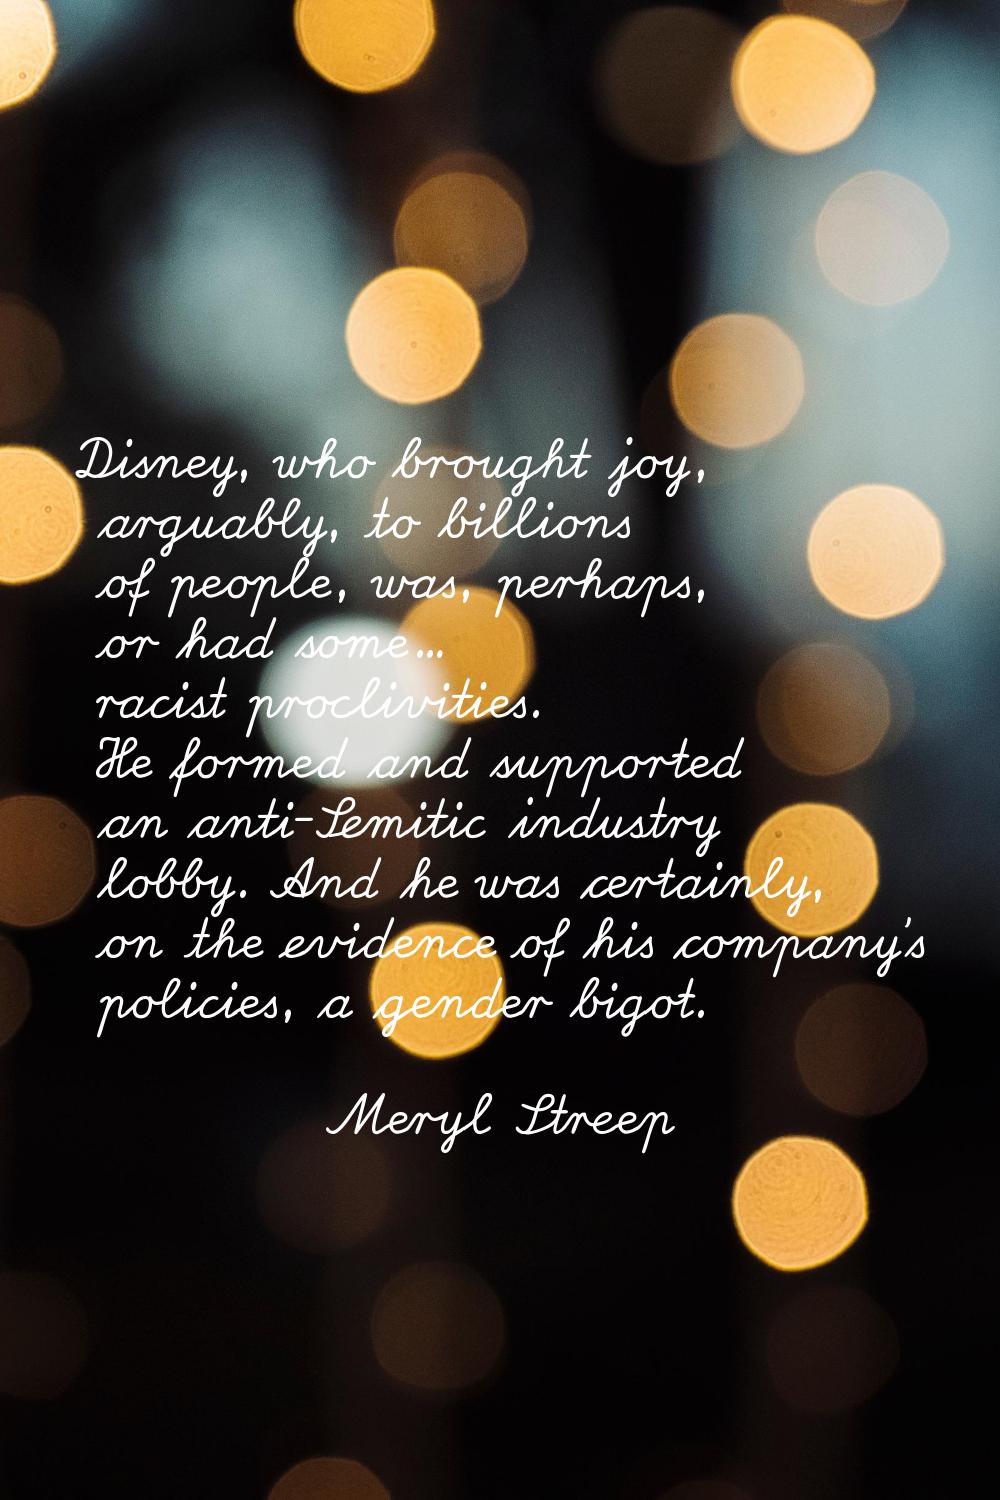 Disney, who brought joy, arguably, to billions of people, was, perhaps, or had some... racist procl